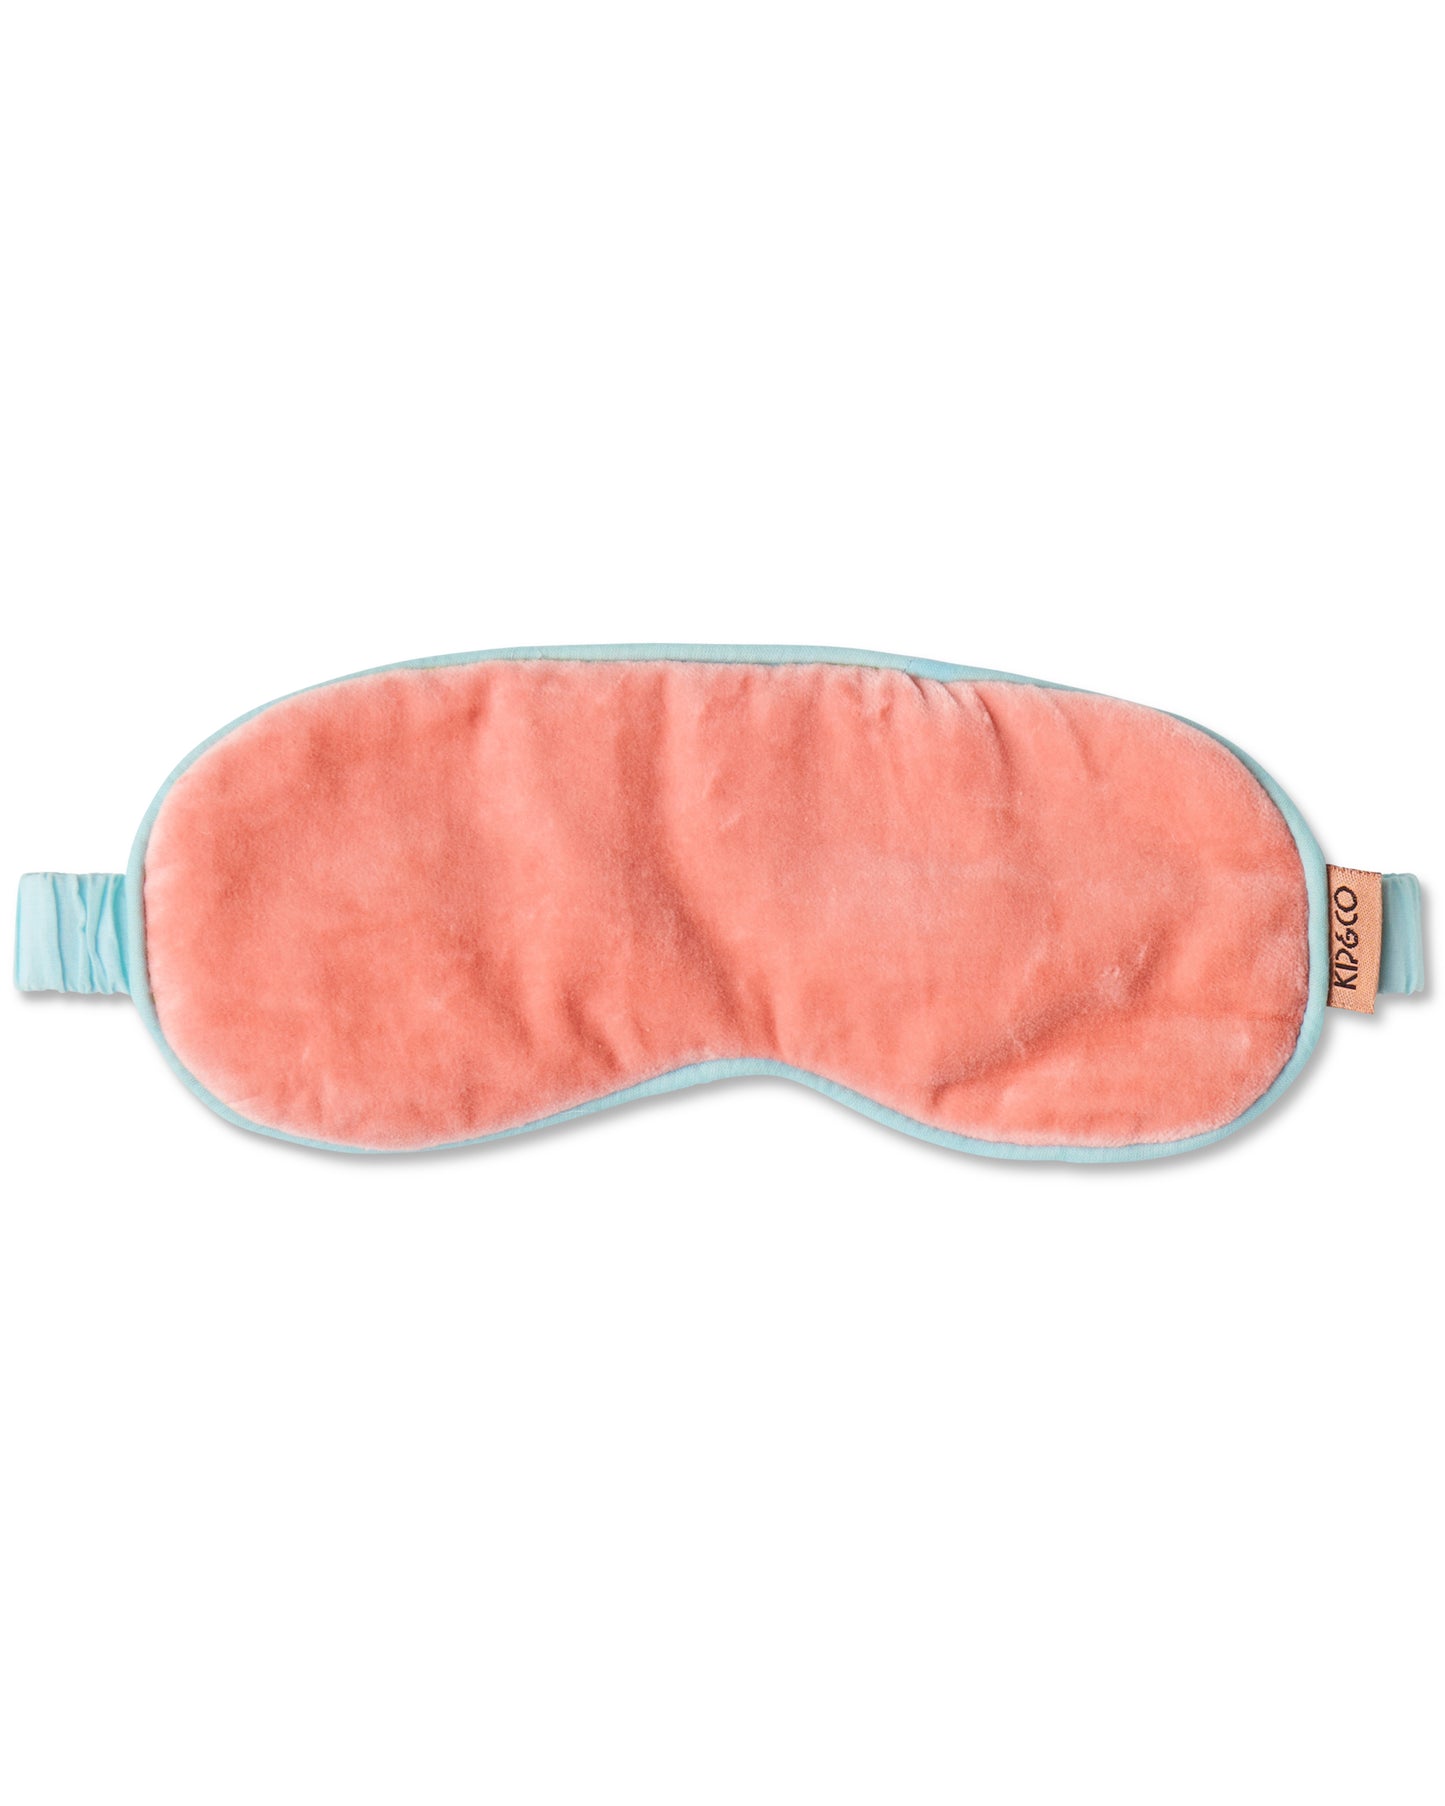 Let your peepers relax and reach the deepest of sleeps with our plush velvet eye masks. A sleep time necessity, the Coral Velvet Eye Mask features a peachy coral pink velvet mask with light blue velvet covered elasticised band.